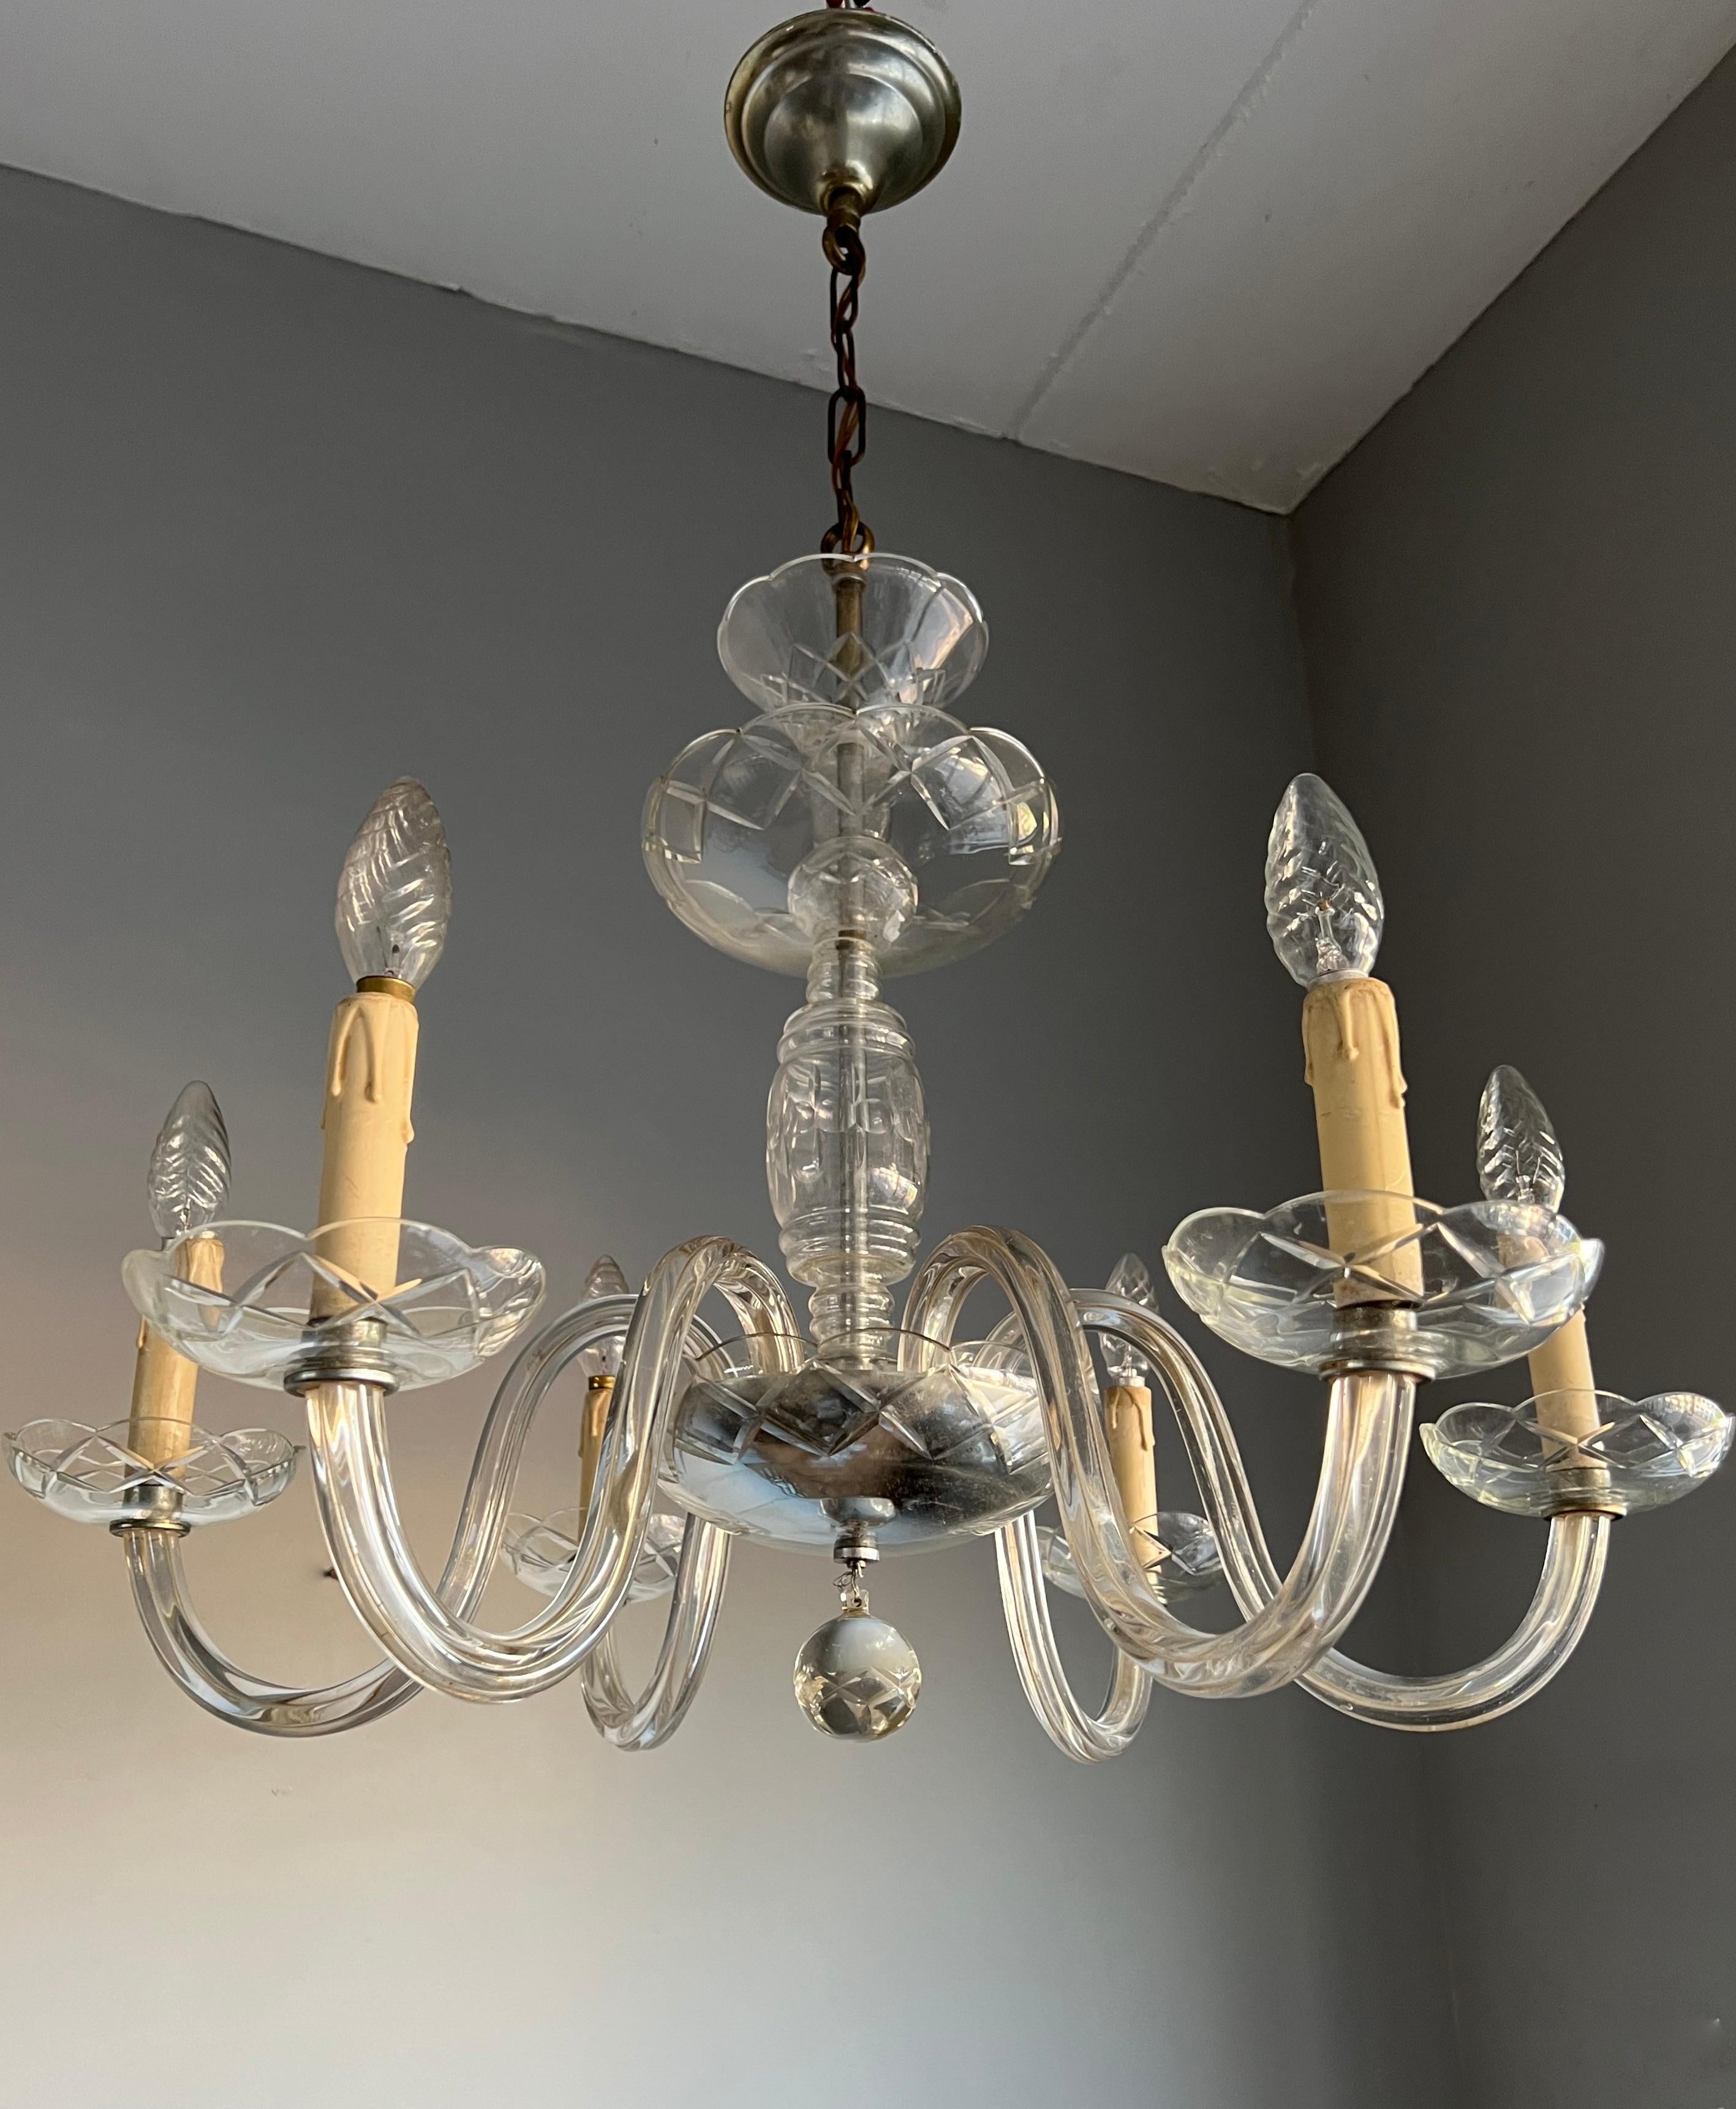 Wonderful Antique Italian Murano Crystal Glass Chandelier / Six Light Pendant In Good Condition For Sale In Lisse, NL